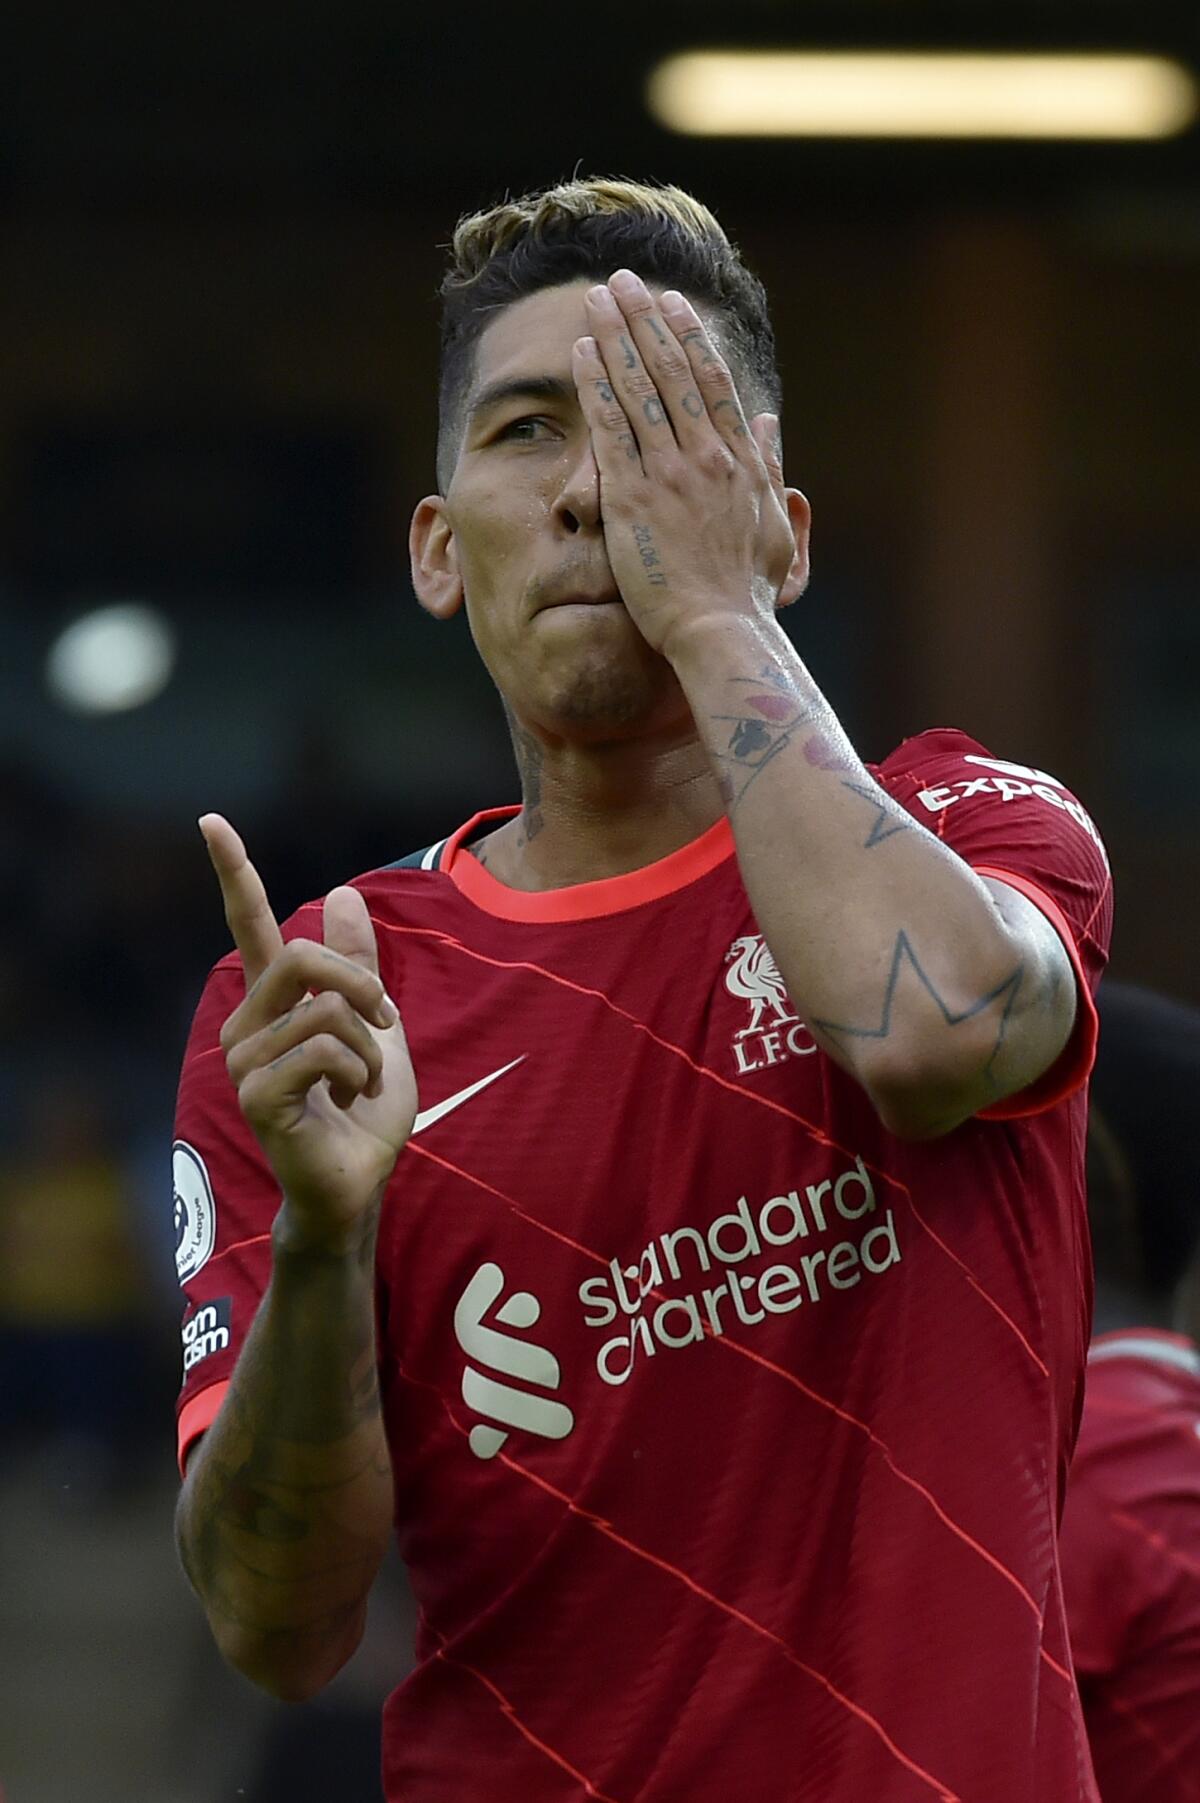 Liverpool's Roberto Firmino celebrates after scoring his side's second goal during the English Premier League soccer match between Norwich City and Liverpool at Carrow Road Stadium in Norwich, England, Saturday, Aug. 14, 2021. (AP photo/Rui Vieira)